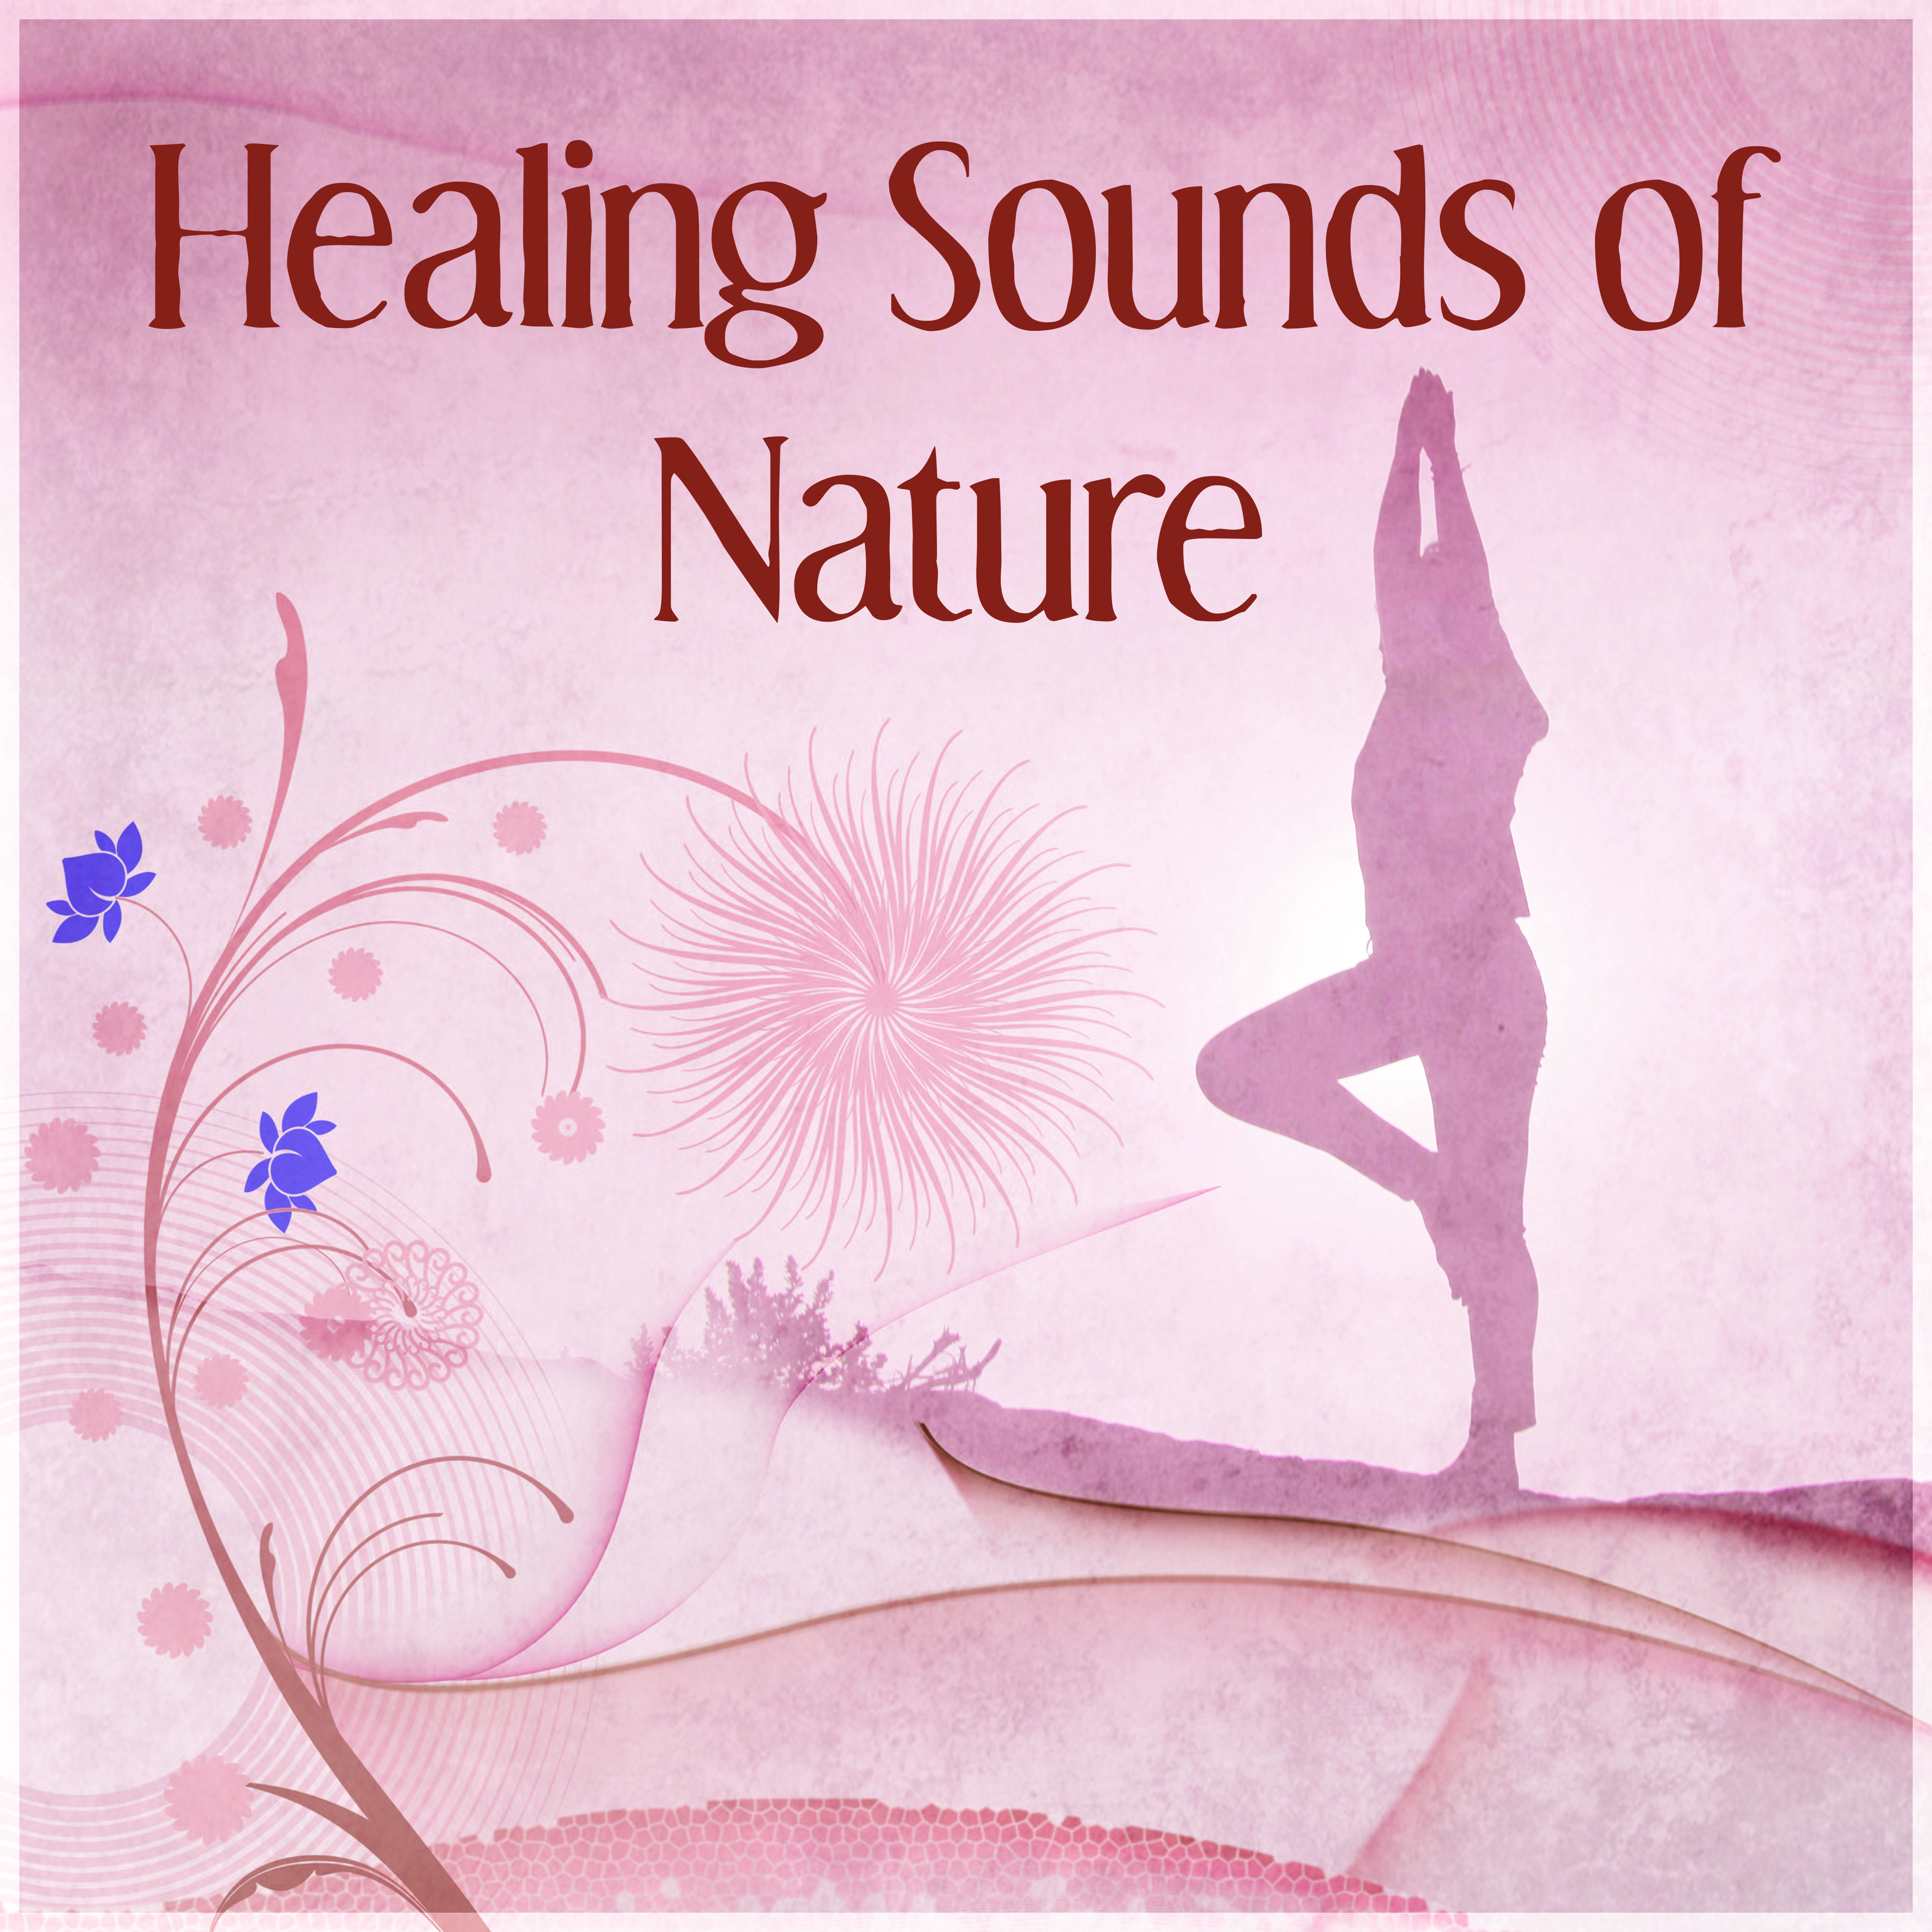 Healing Sounds of Nature – New Age Music for Deep Relaxation, Feel Inner Power with Healing Sounds, Background for Meditation, Deep Breathing